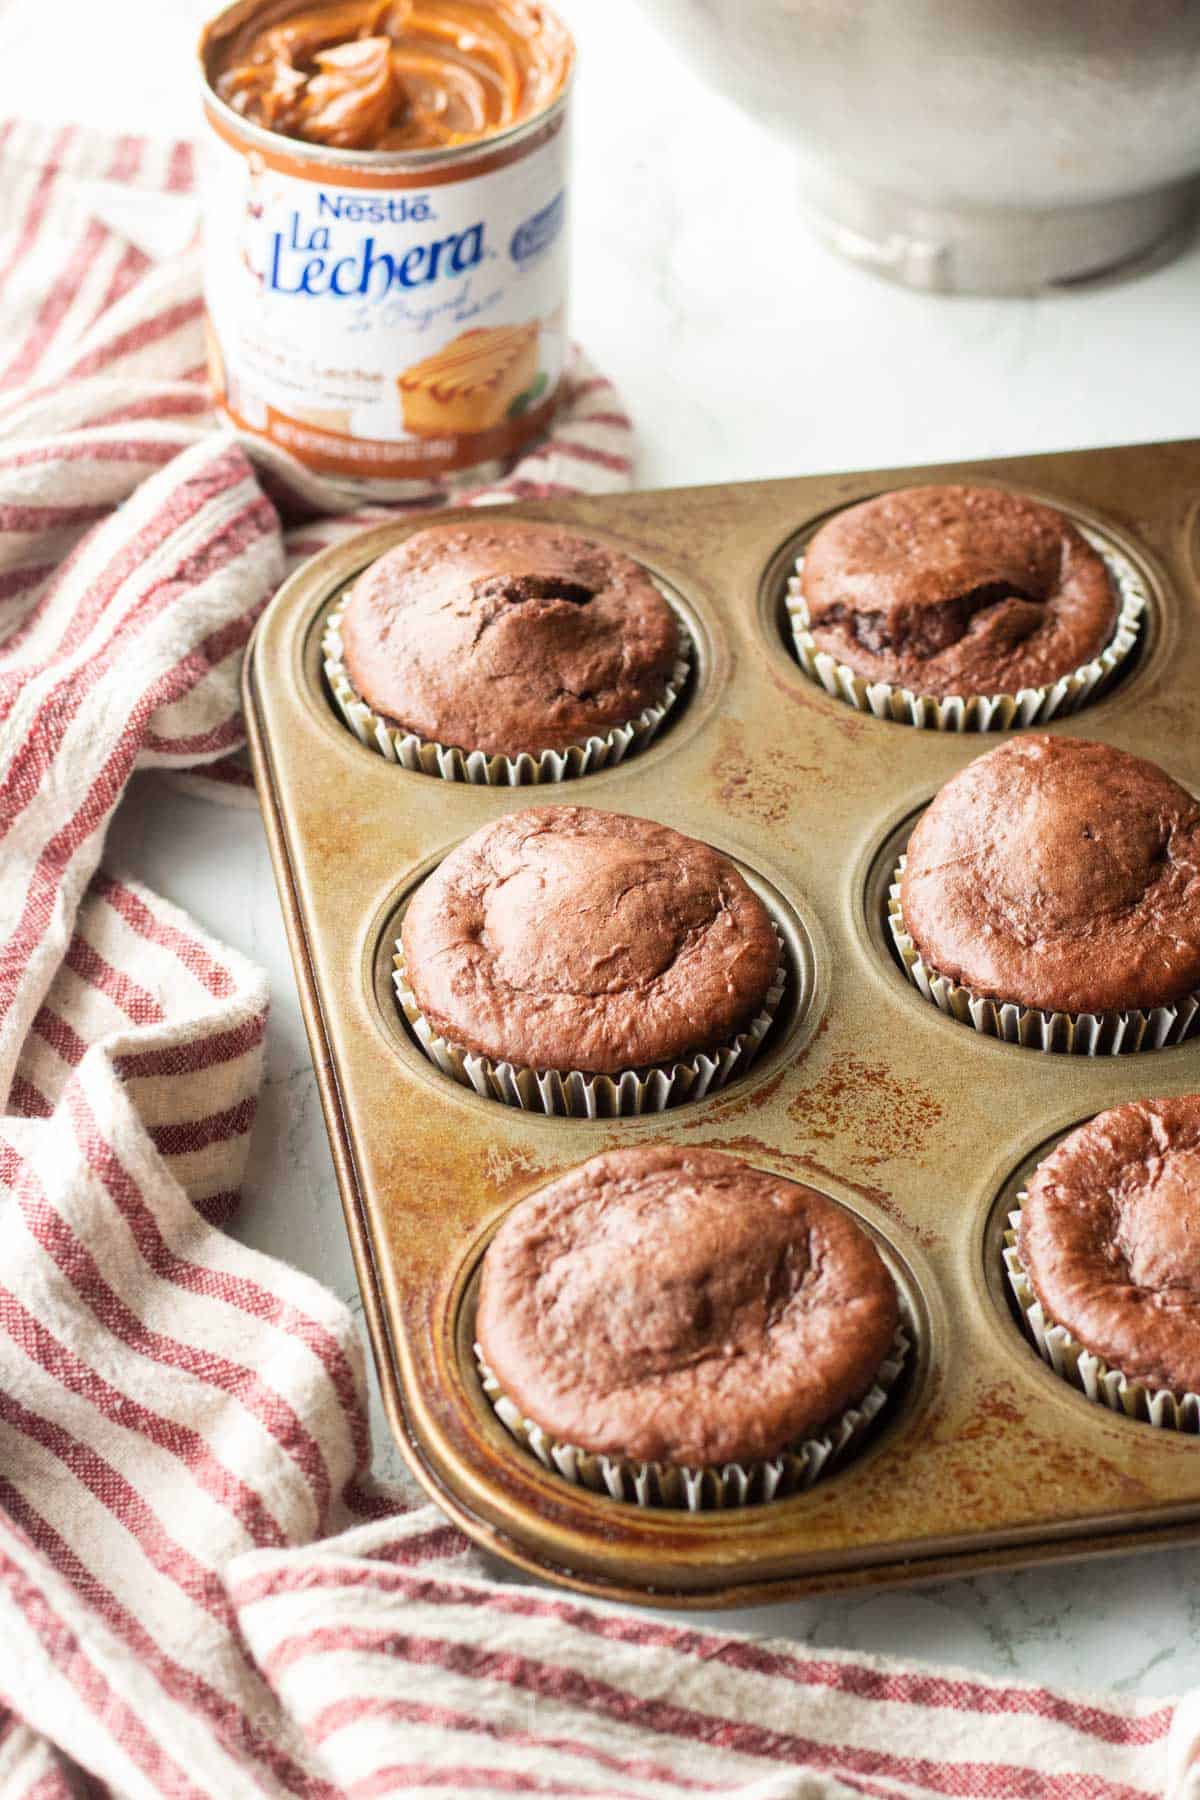 Baked chocolate cupcakes in metal pan with can of dulce de leche behind.